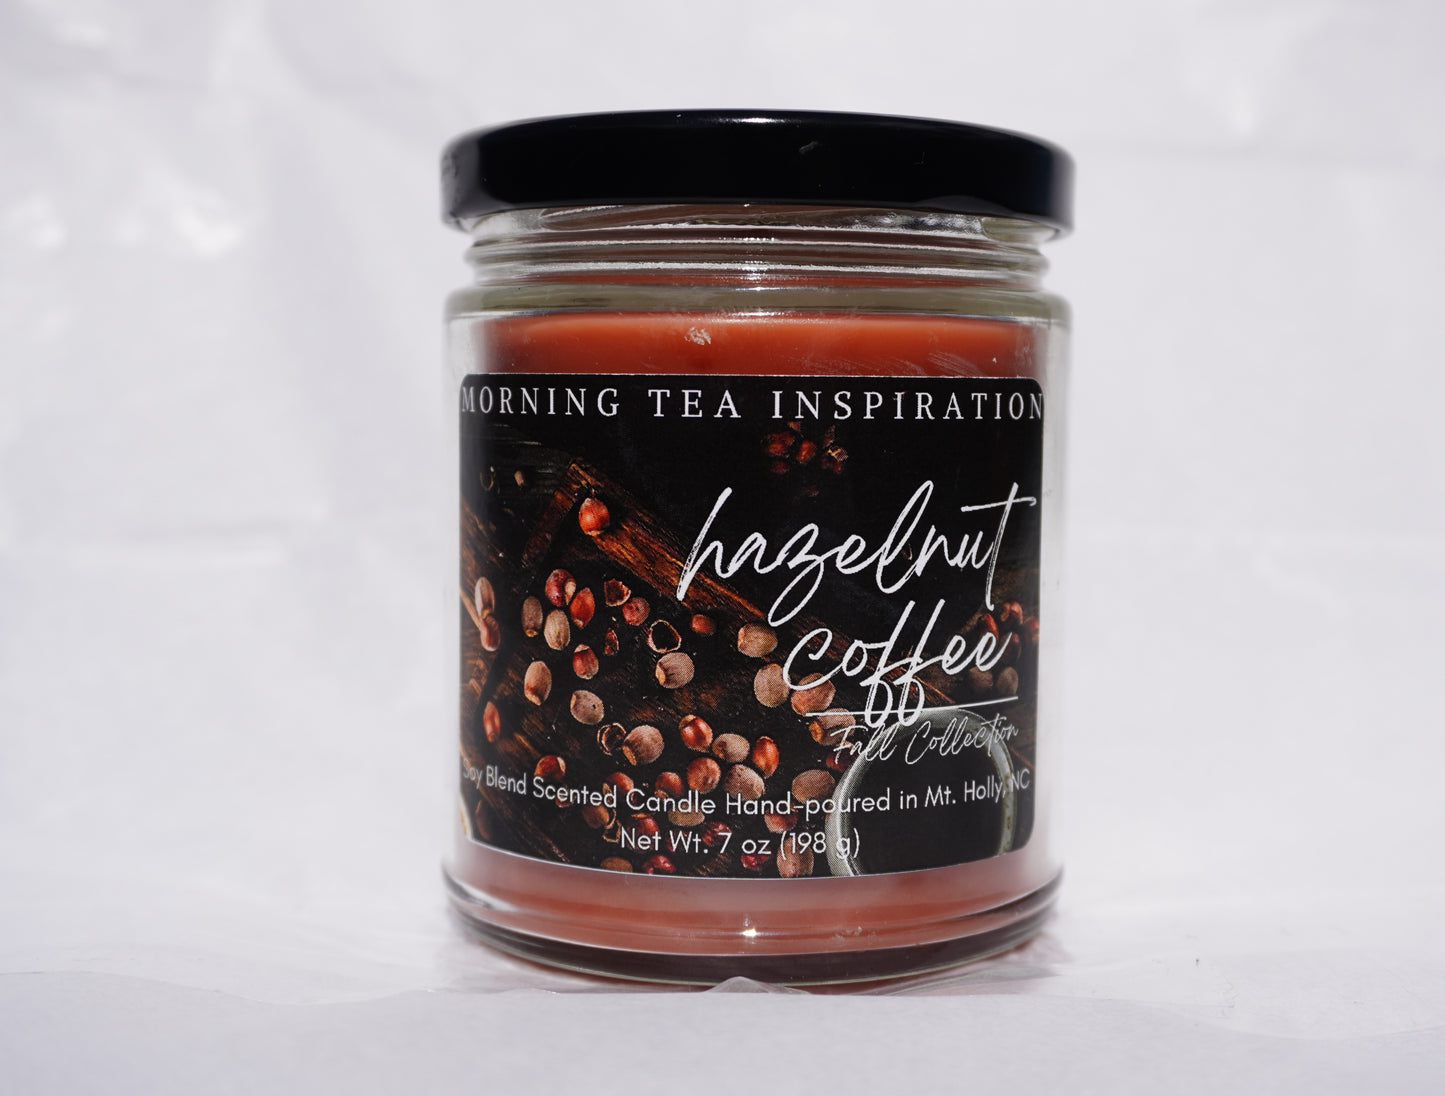 Hazelnut Coffee Scented Candle